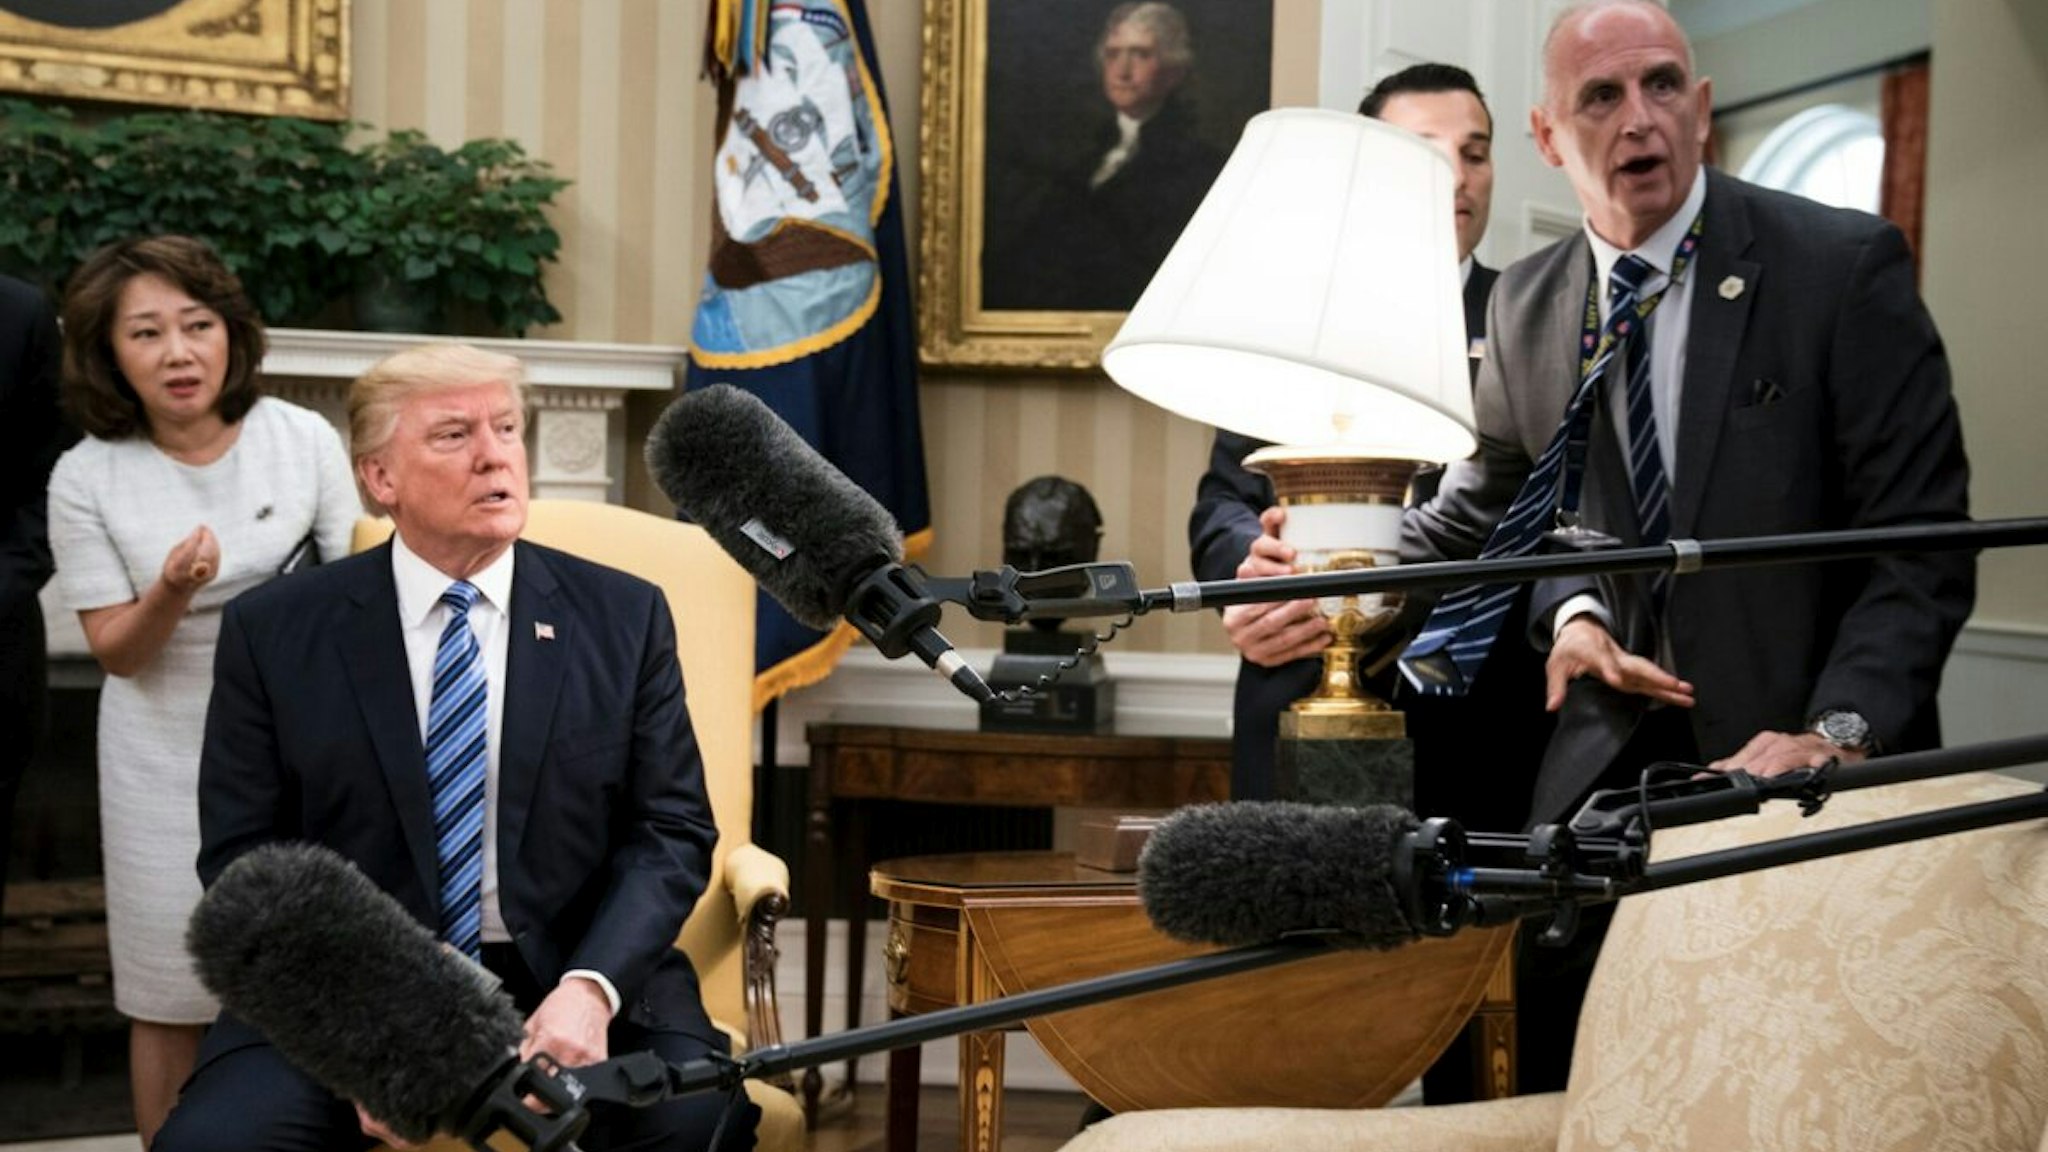 US President Donald Trump and Keith Schiller (R) react as a lamp is bumped by press before a meeting with South Korea'ss President Moon Jae-in in the Oval Office of the White House June 30, 2017 in Washington, DC.